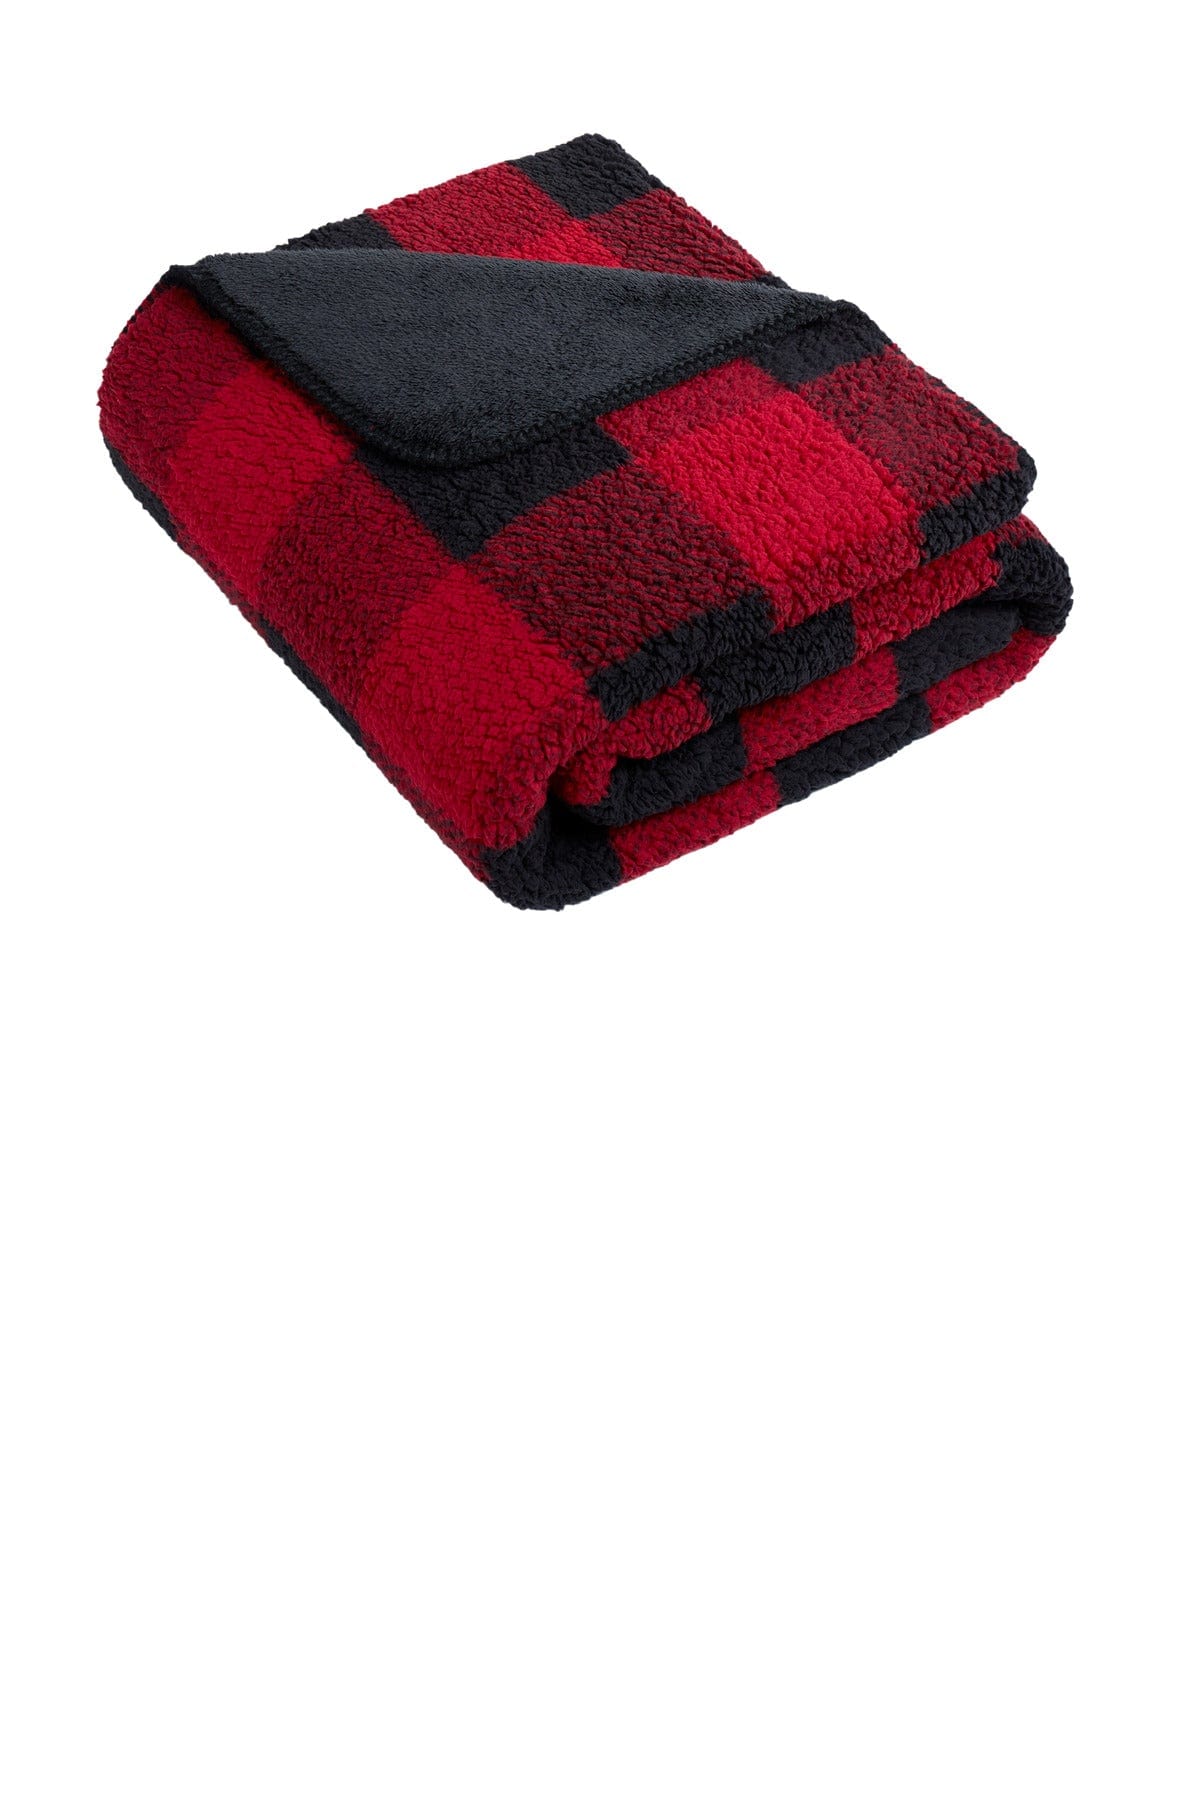 Port Authority ® Double-Sided Sherpa/Plush Blanket BP48